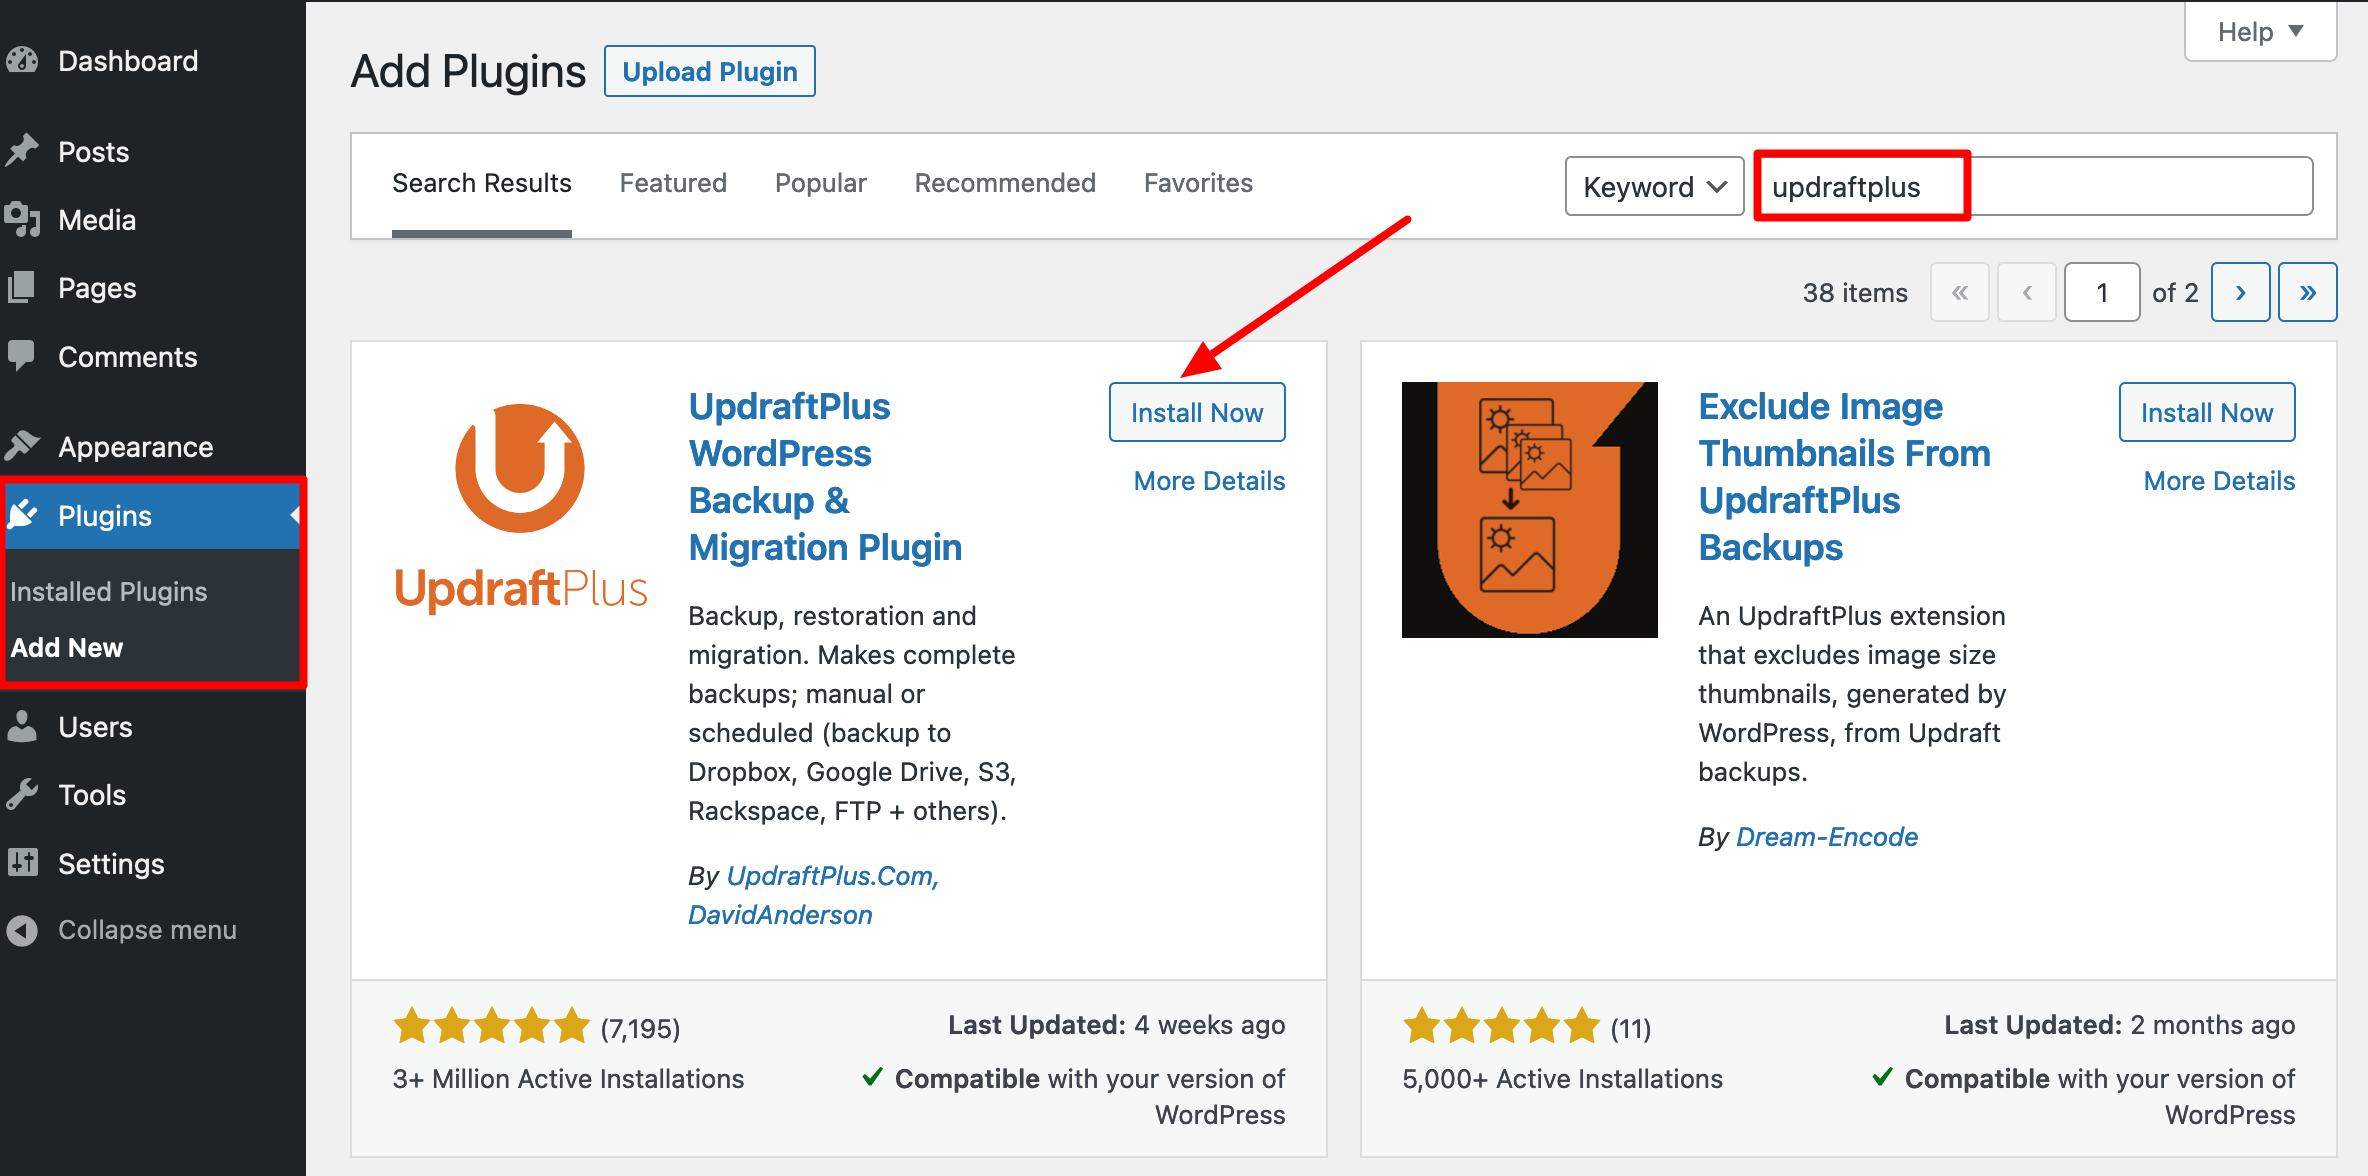 Installation of the UpdraftPlus plugin from the WordPress dashboard.